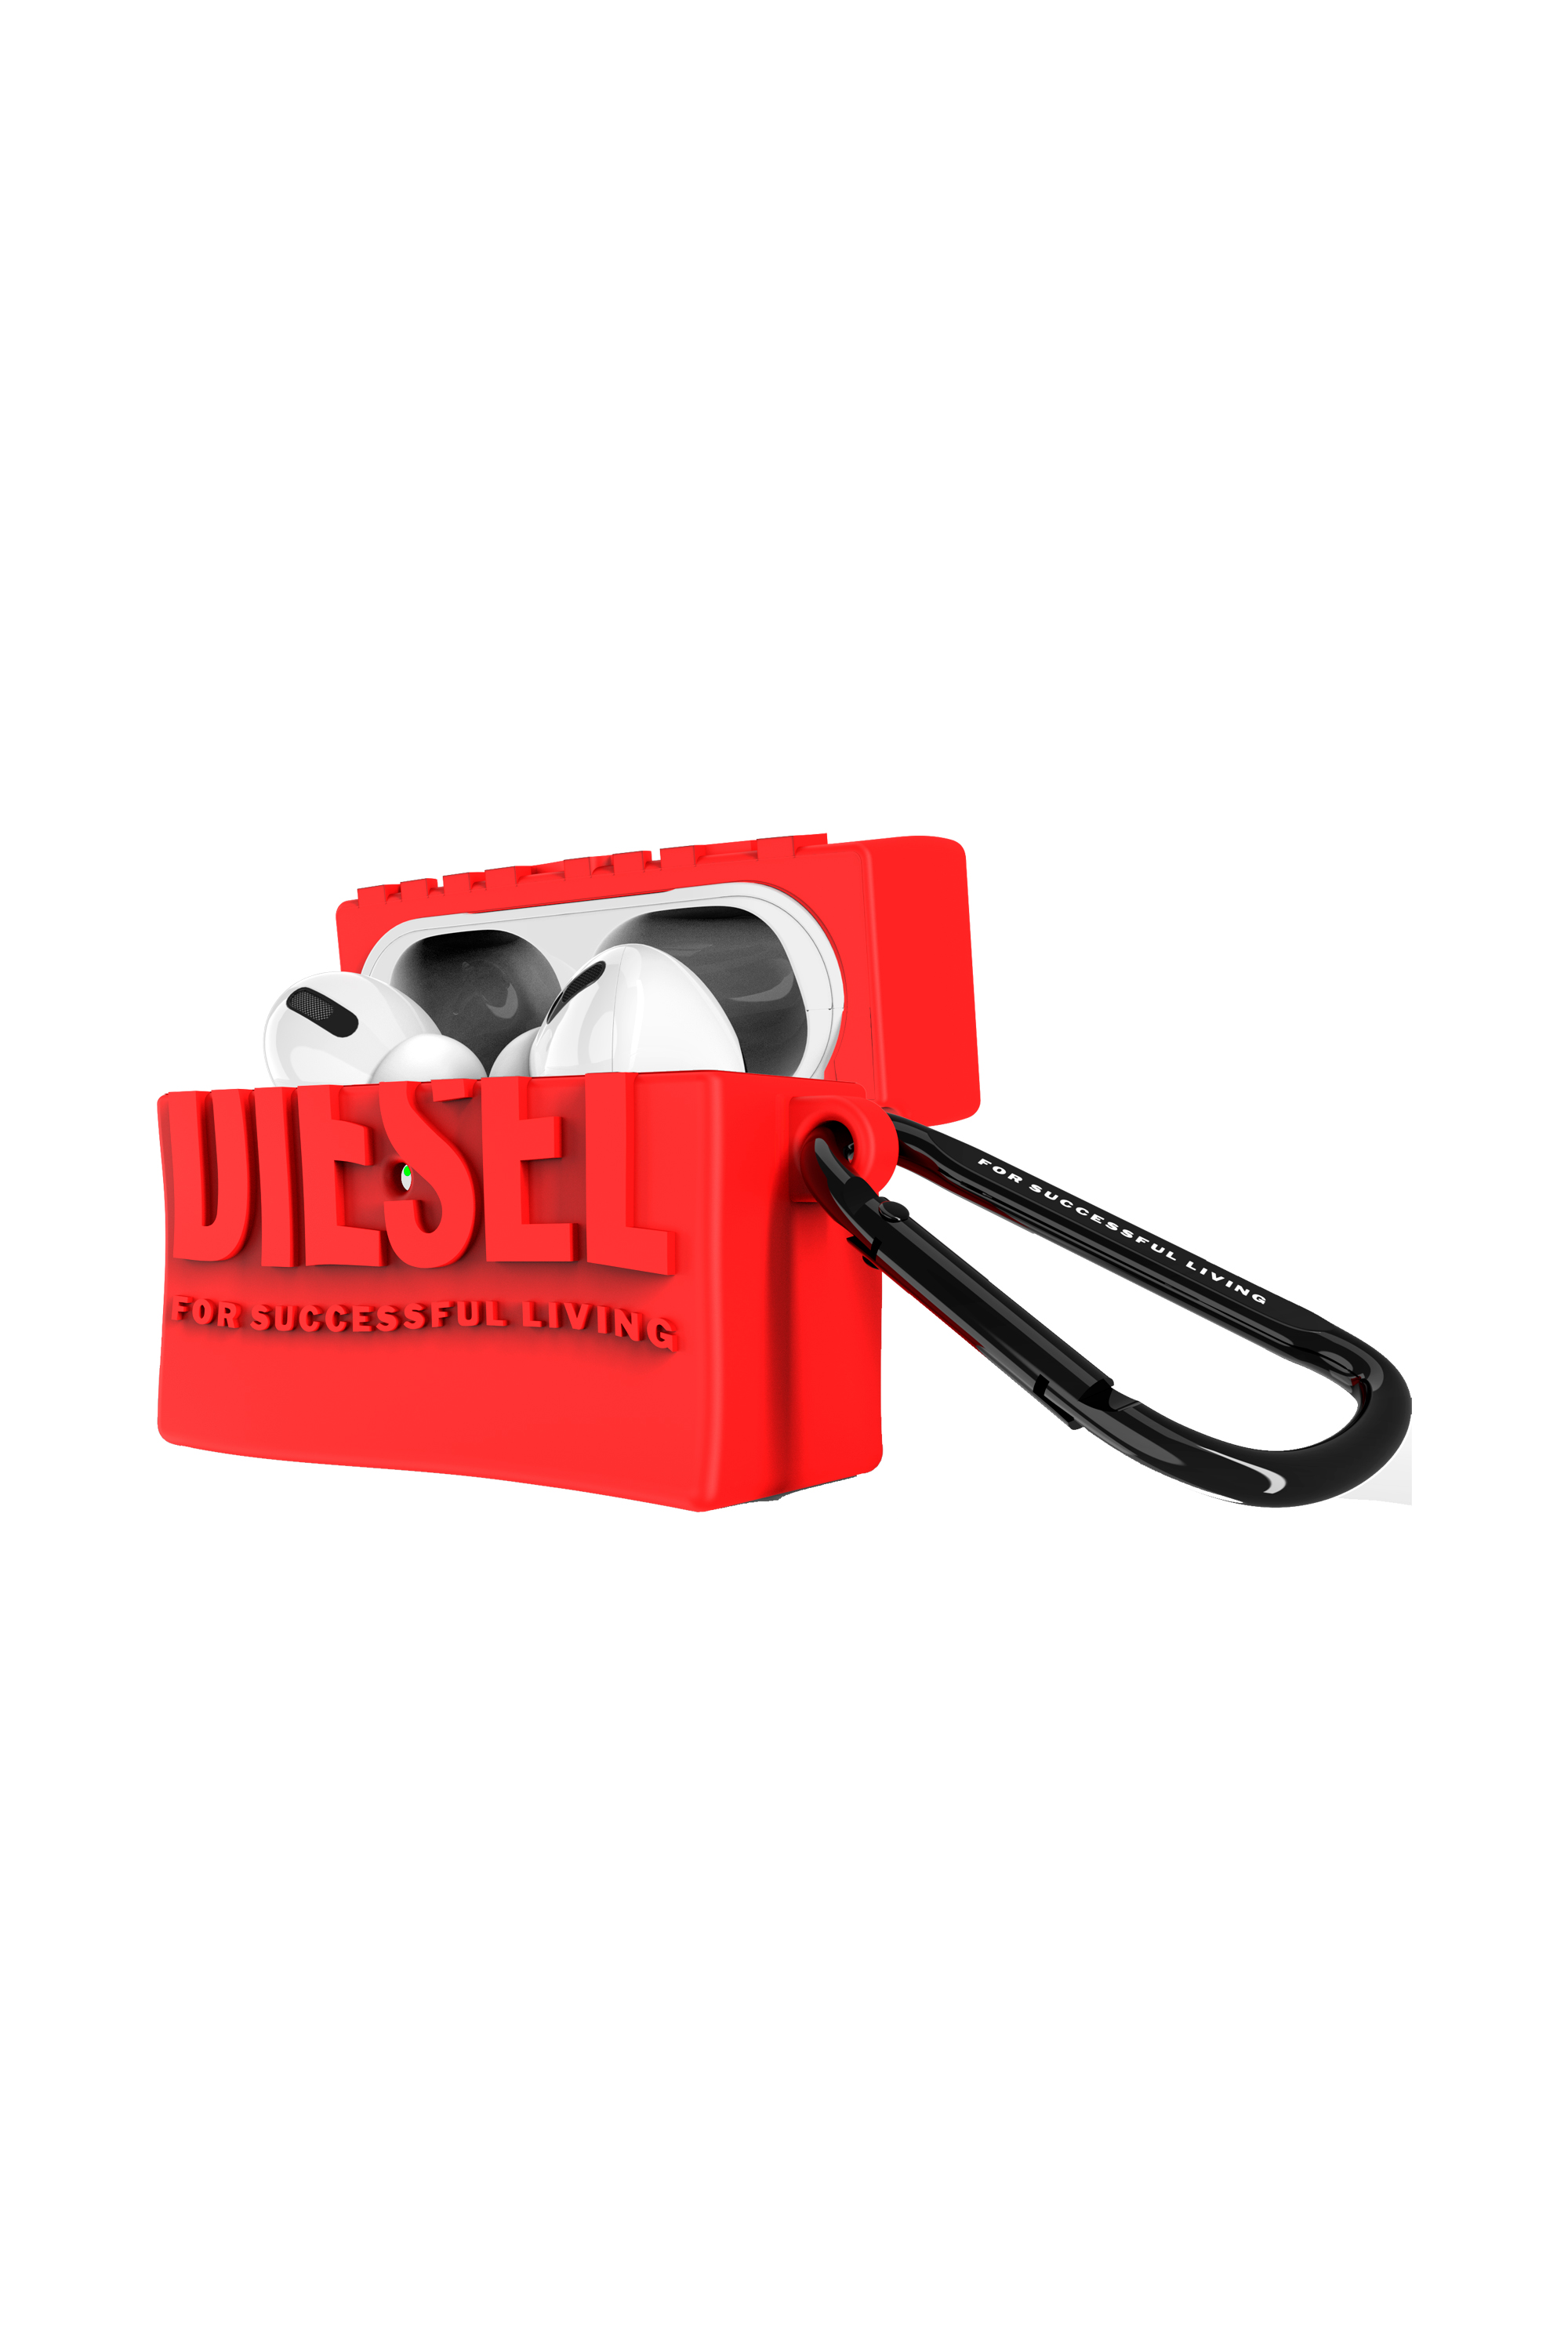 Diesel - 54135 AIRPOD CASE, Unisex D By Airpod case Airpods Pro / Pro 2 in Red - Image 4